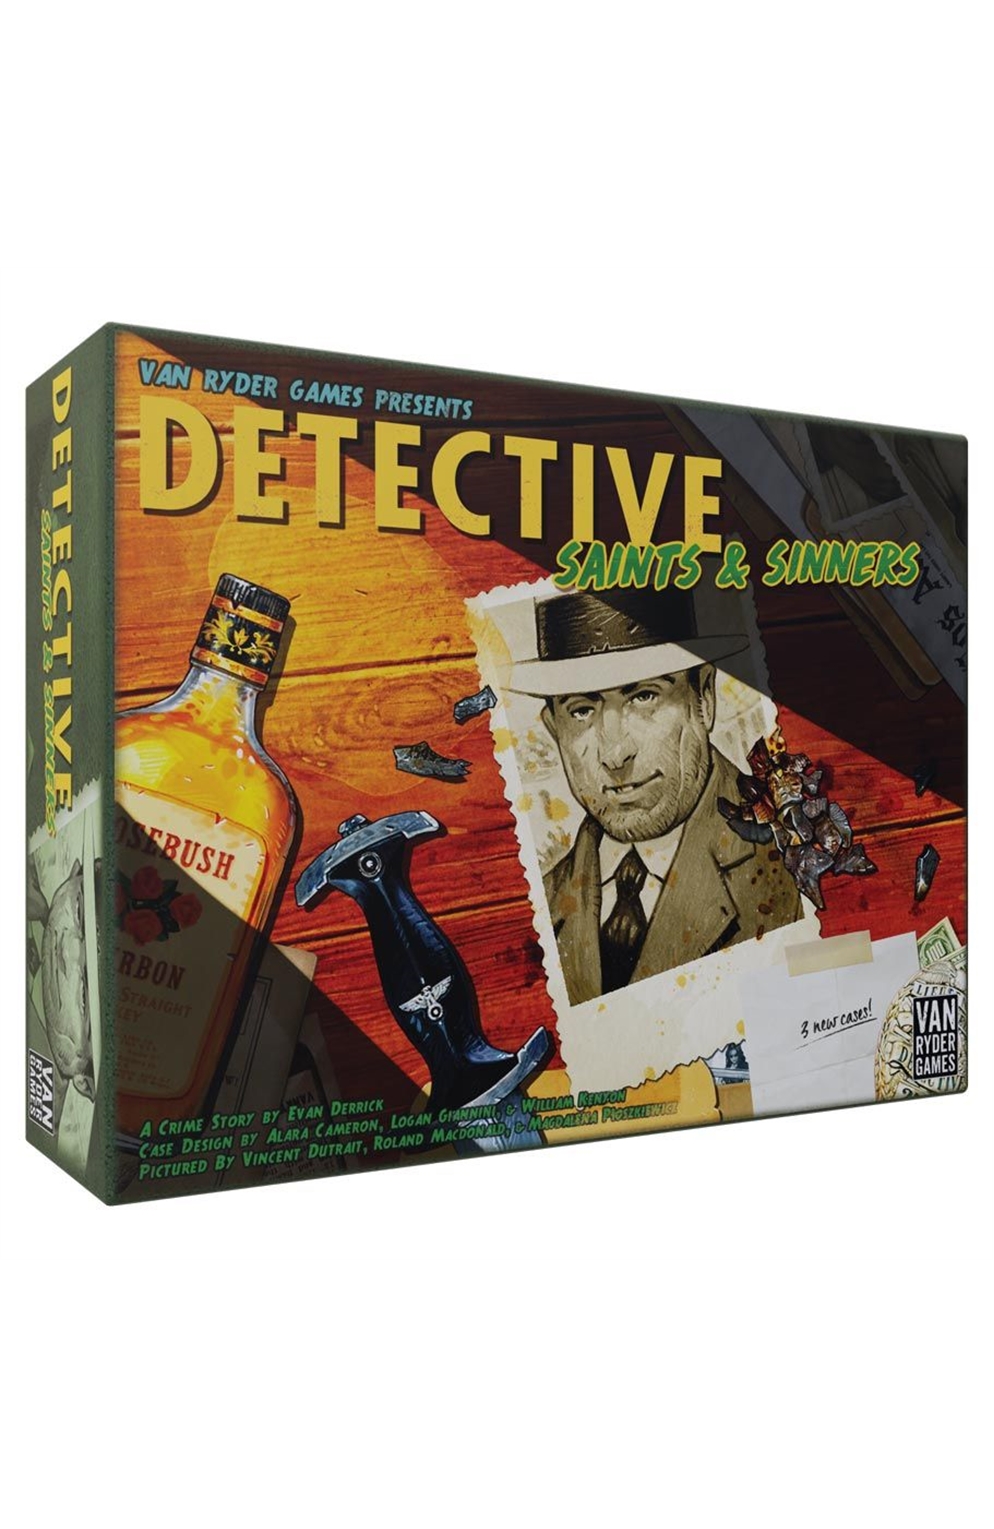 Detective: City of Angels Saints & Sinners Expansion